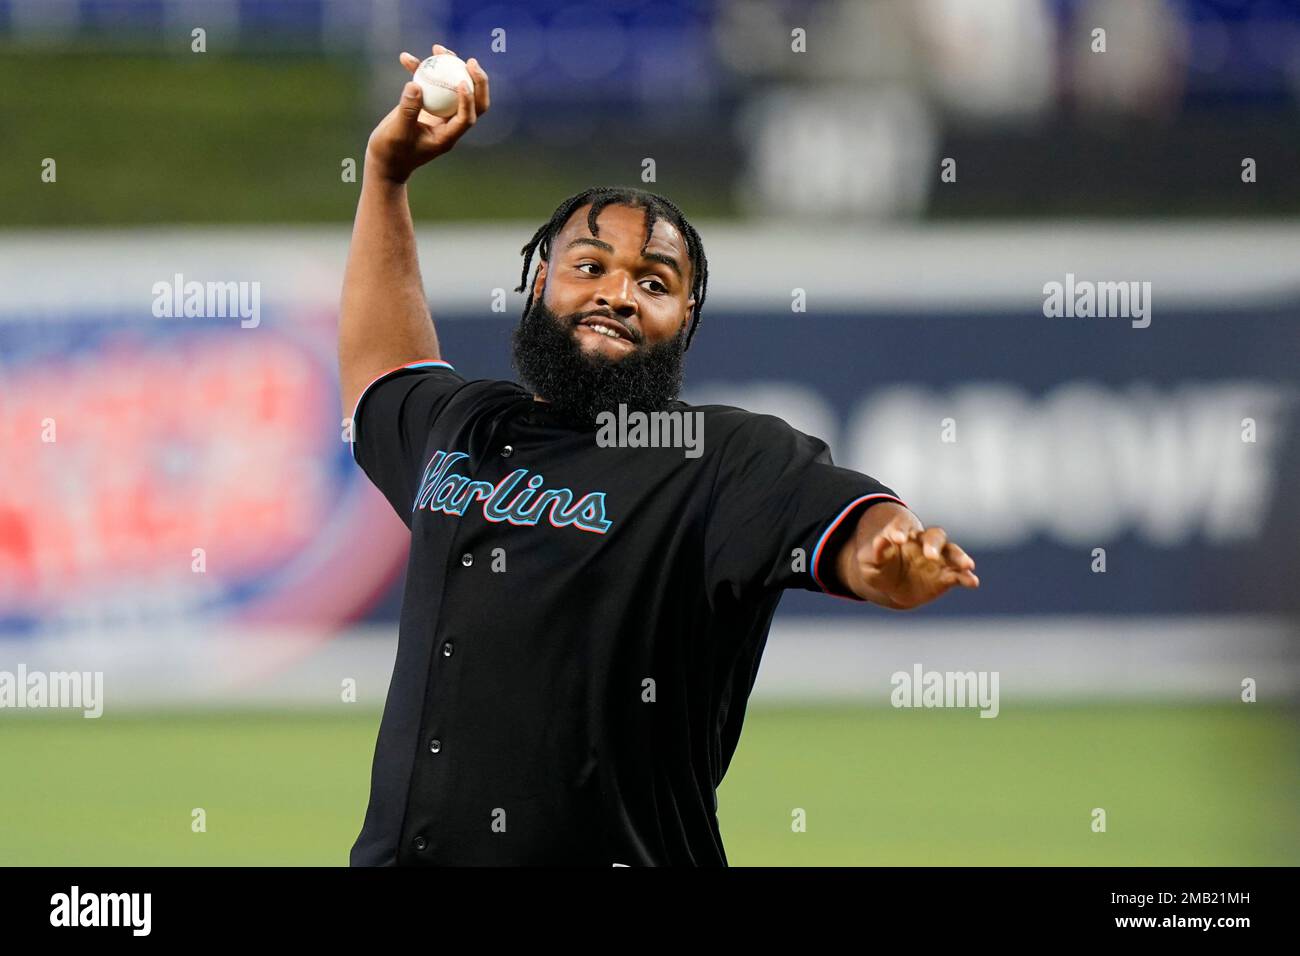 Miami Dolphins defensive tackle Christian Wilkins throws out a